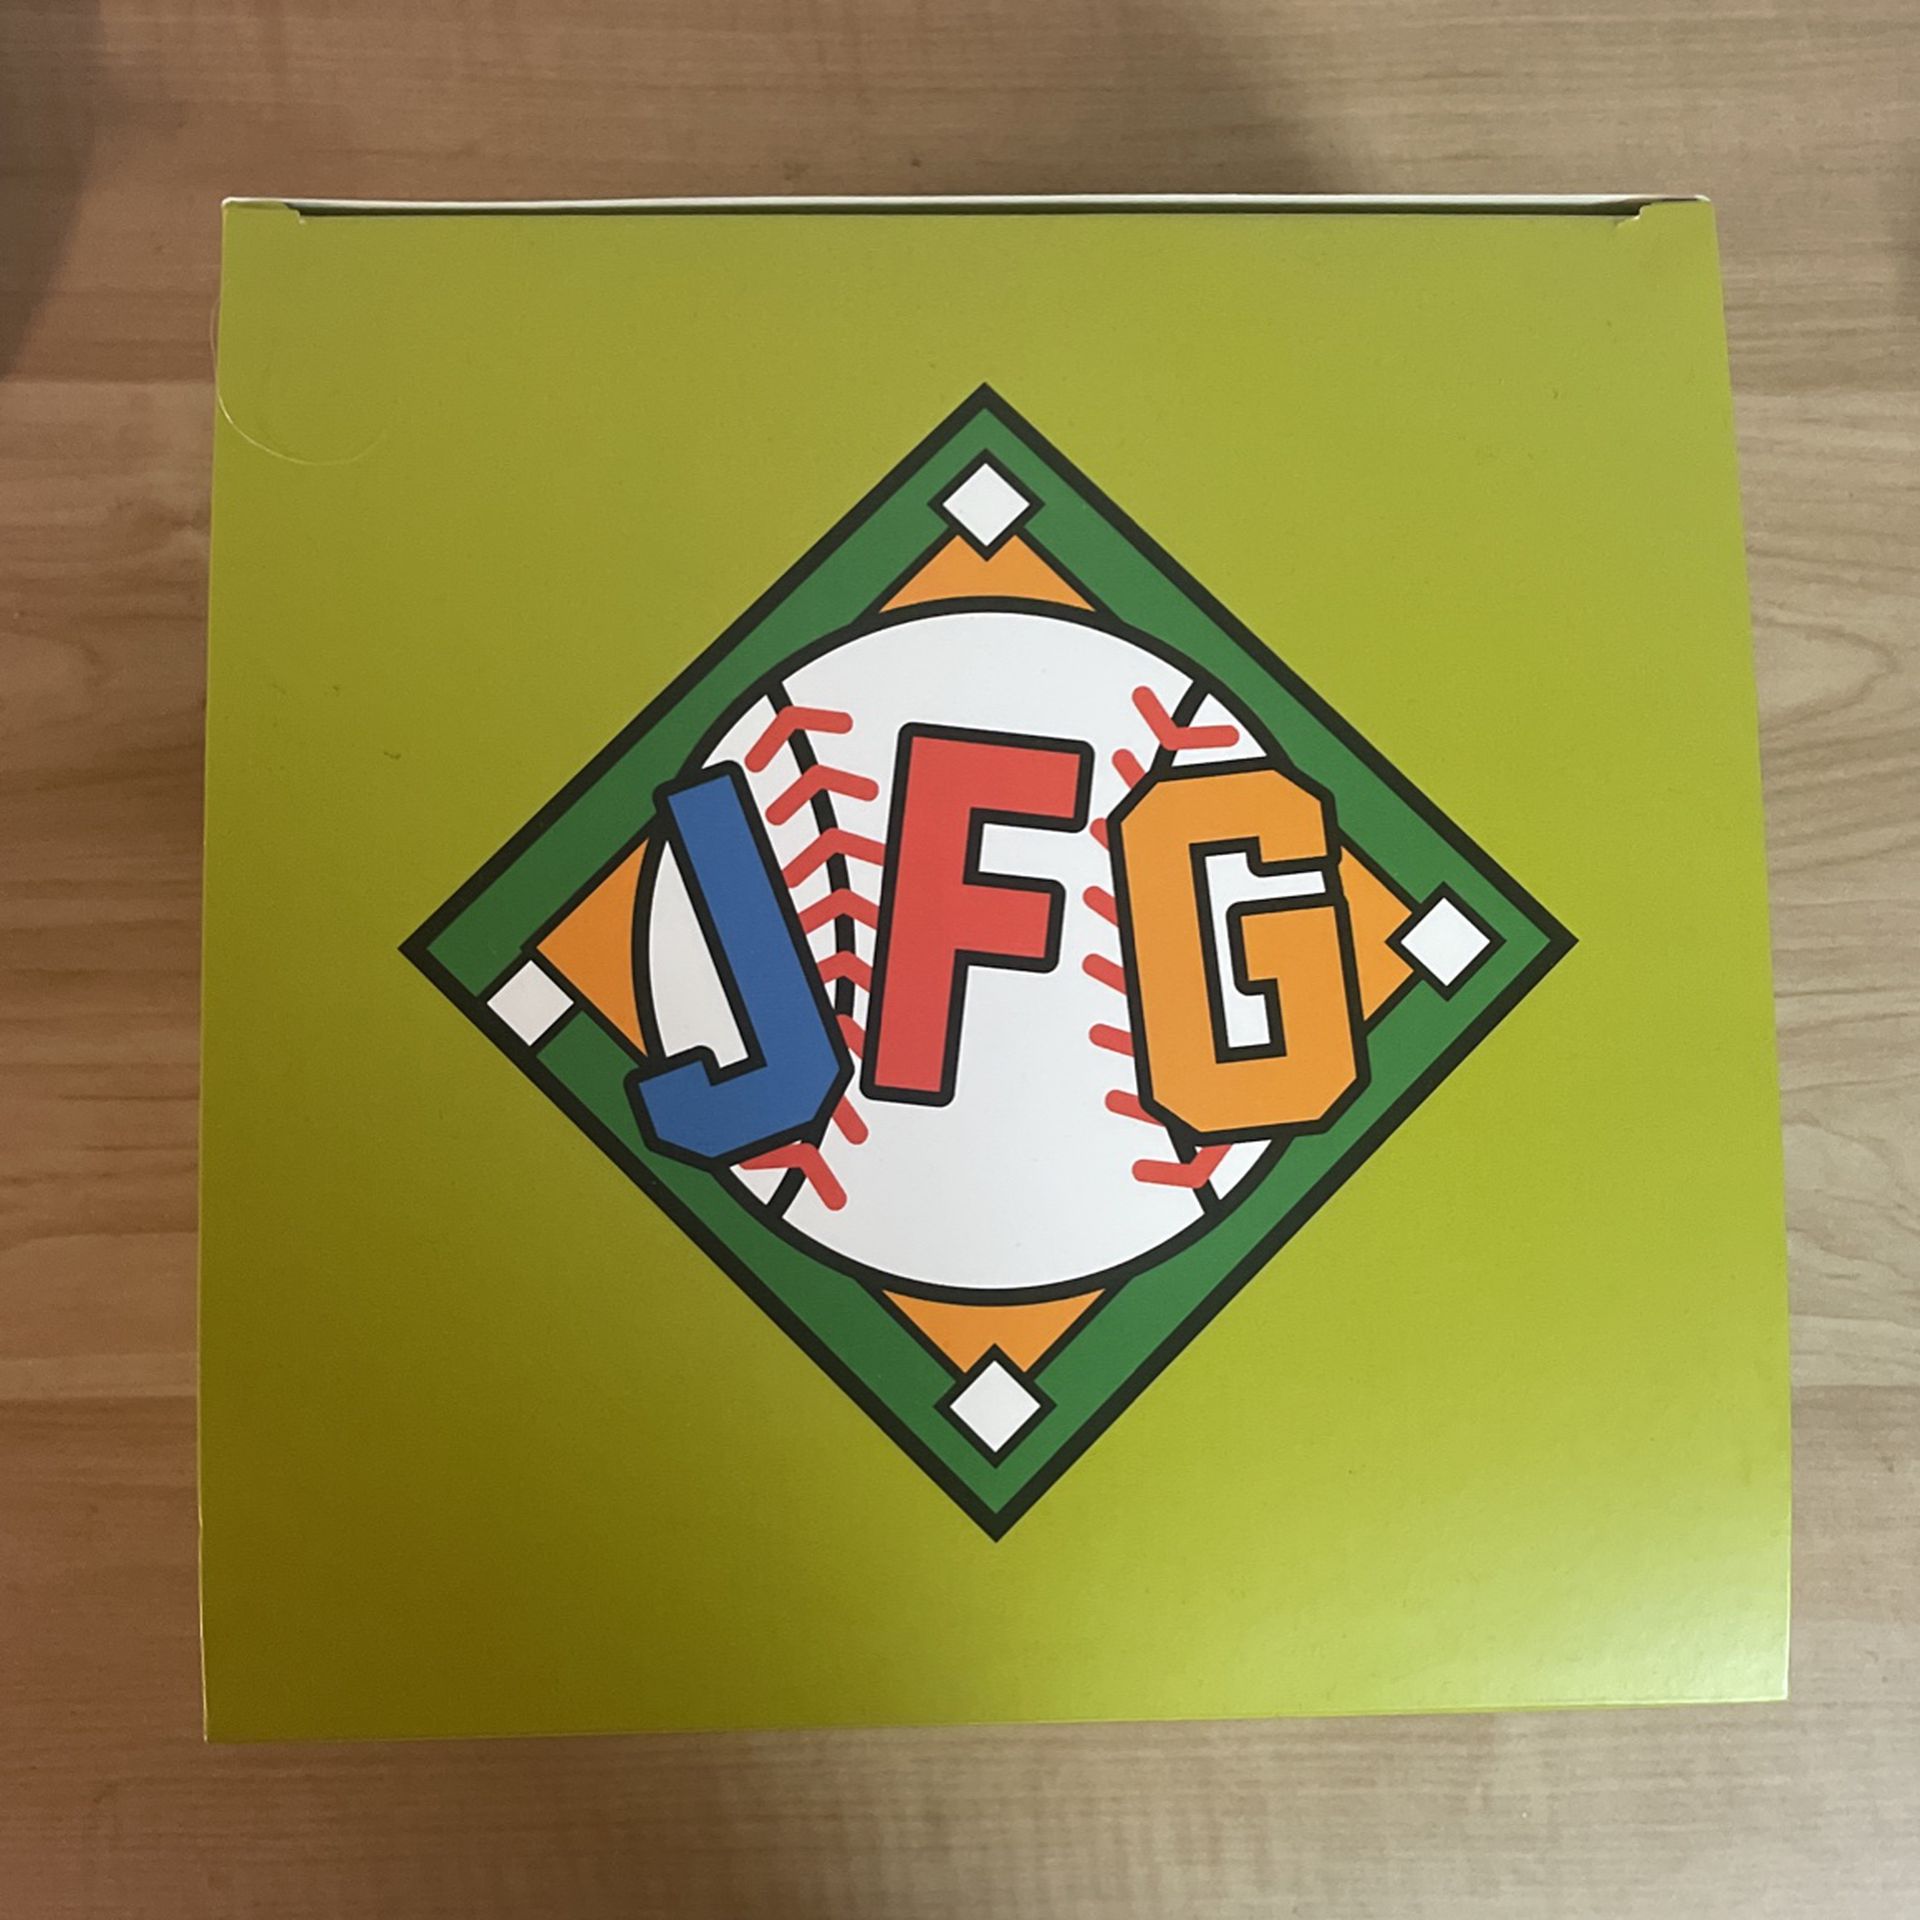 JFG CUBS FITTED HAT